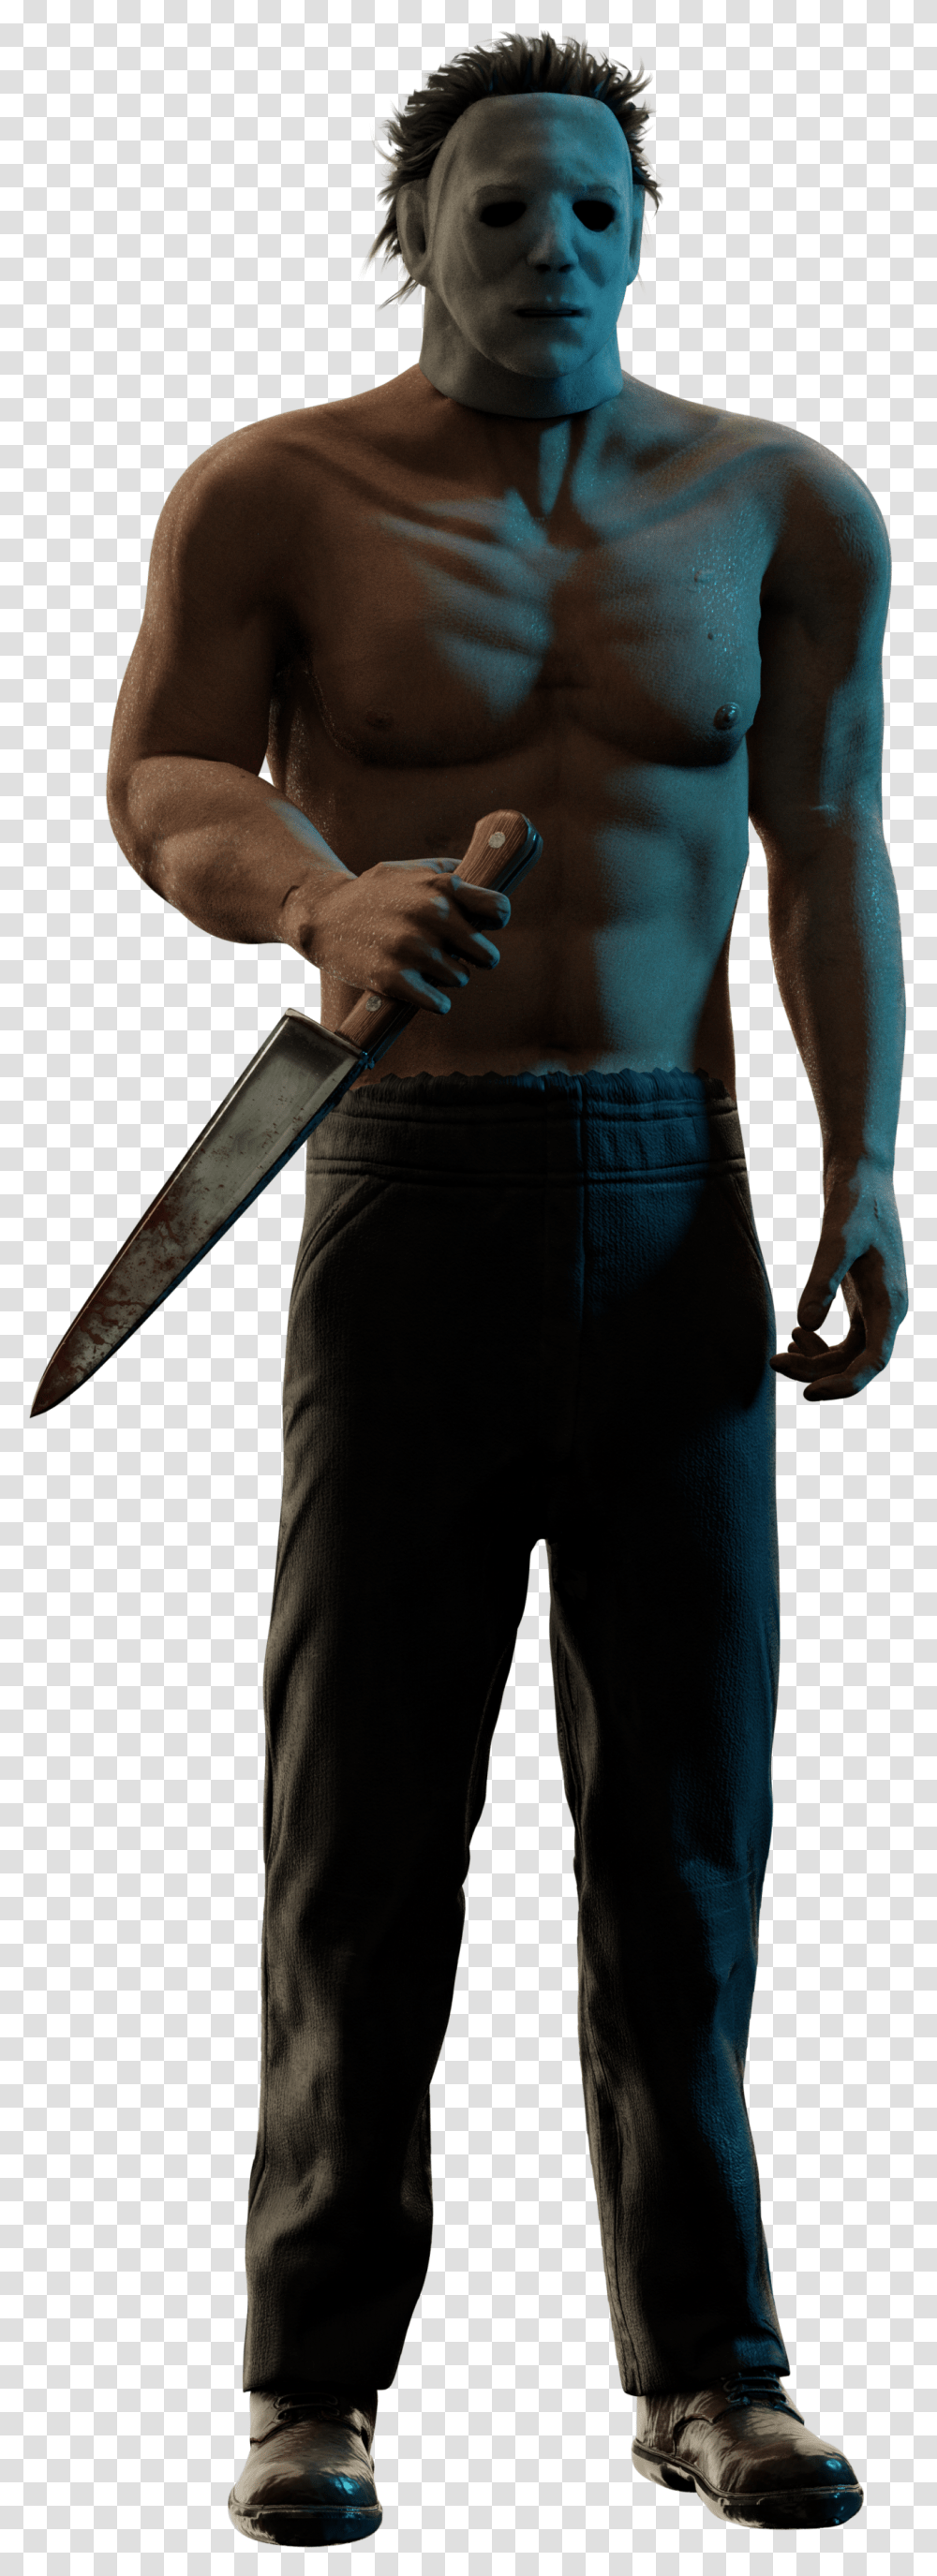 Happy Spooktober From Jbw Dead By Daylight Michael Myers Shirtless Transparent Png